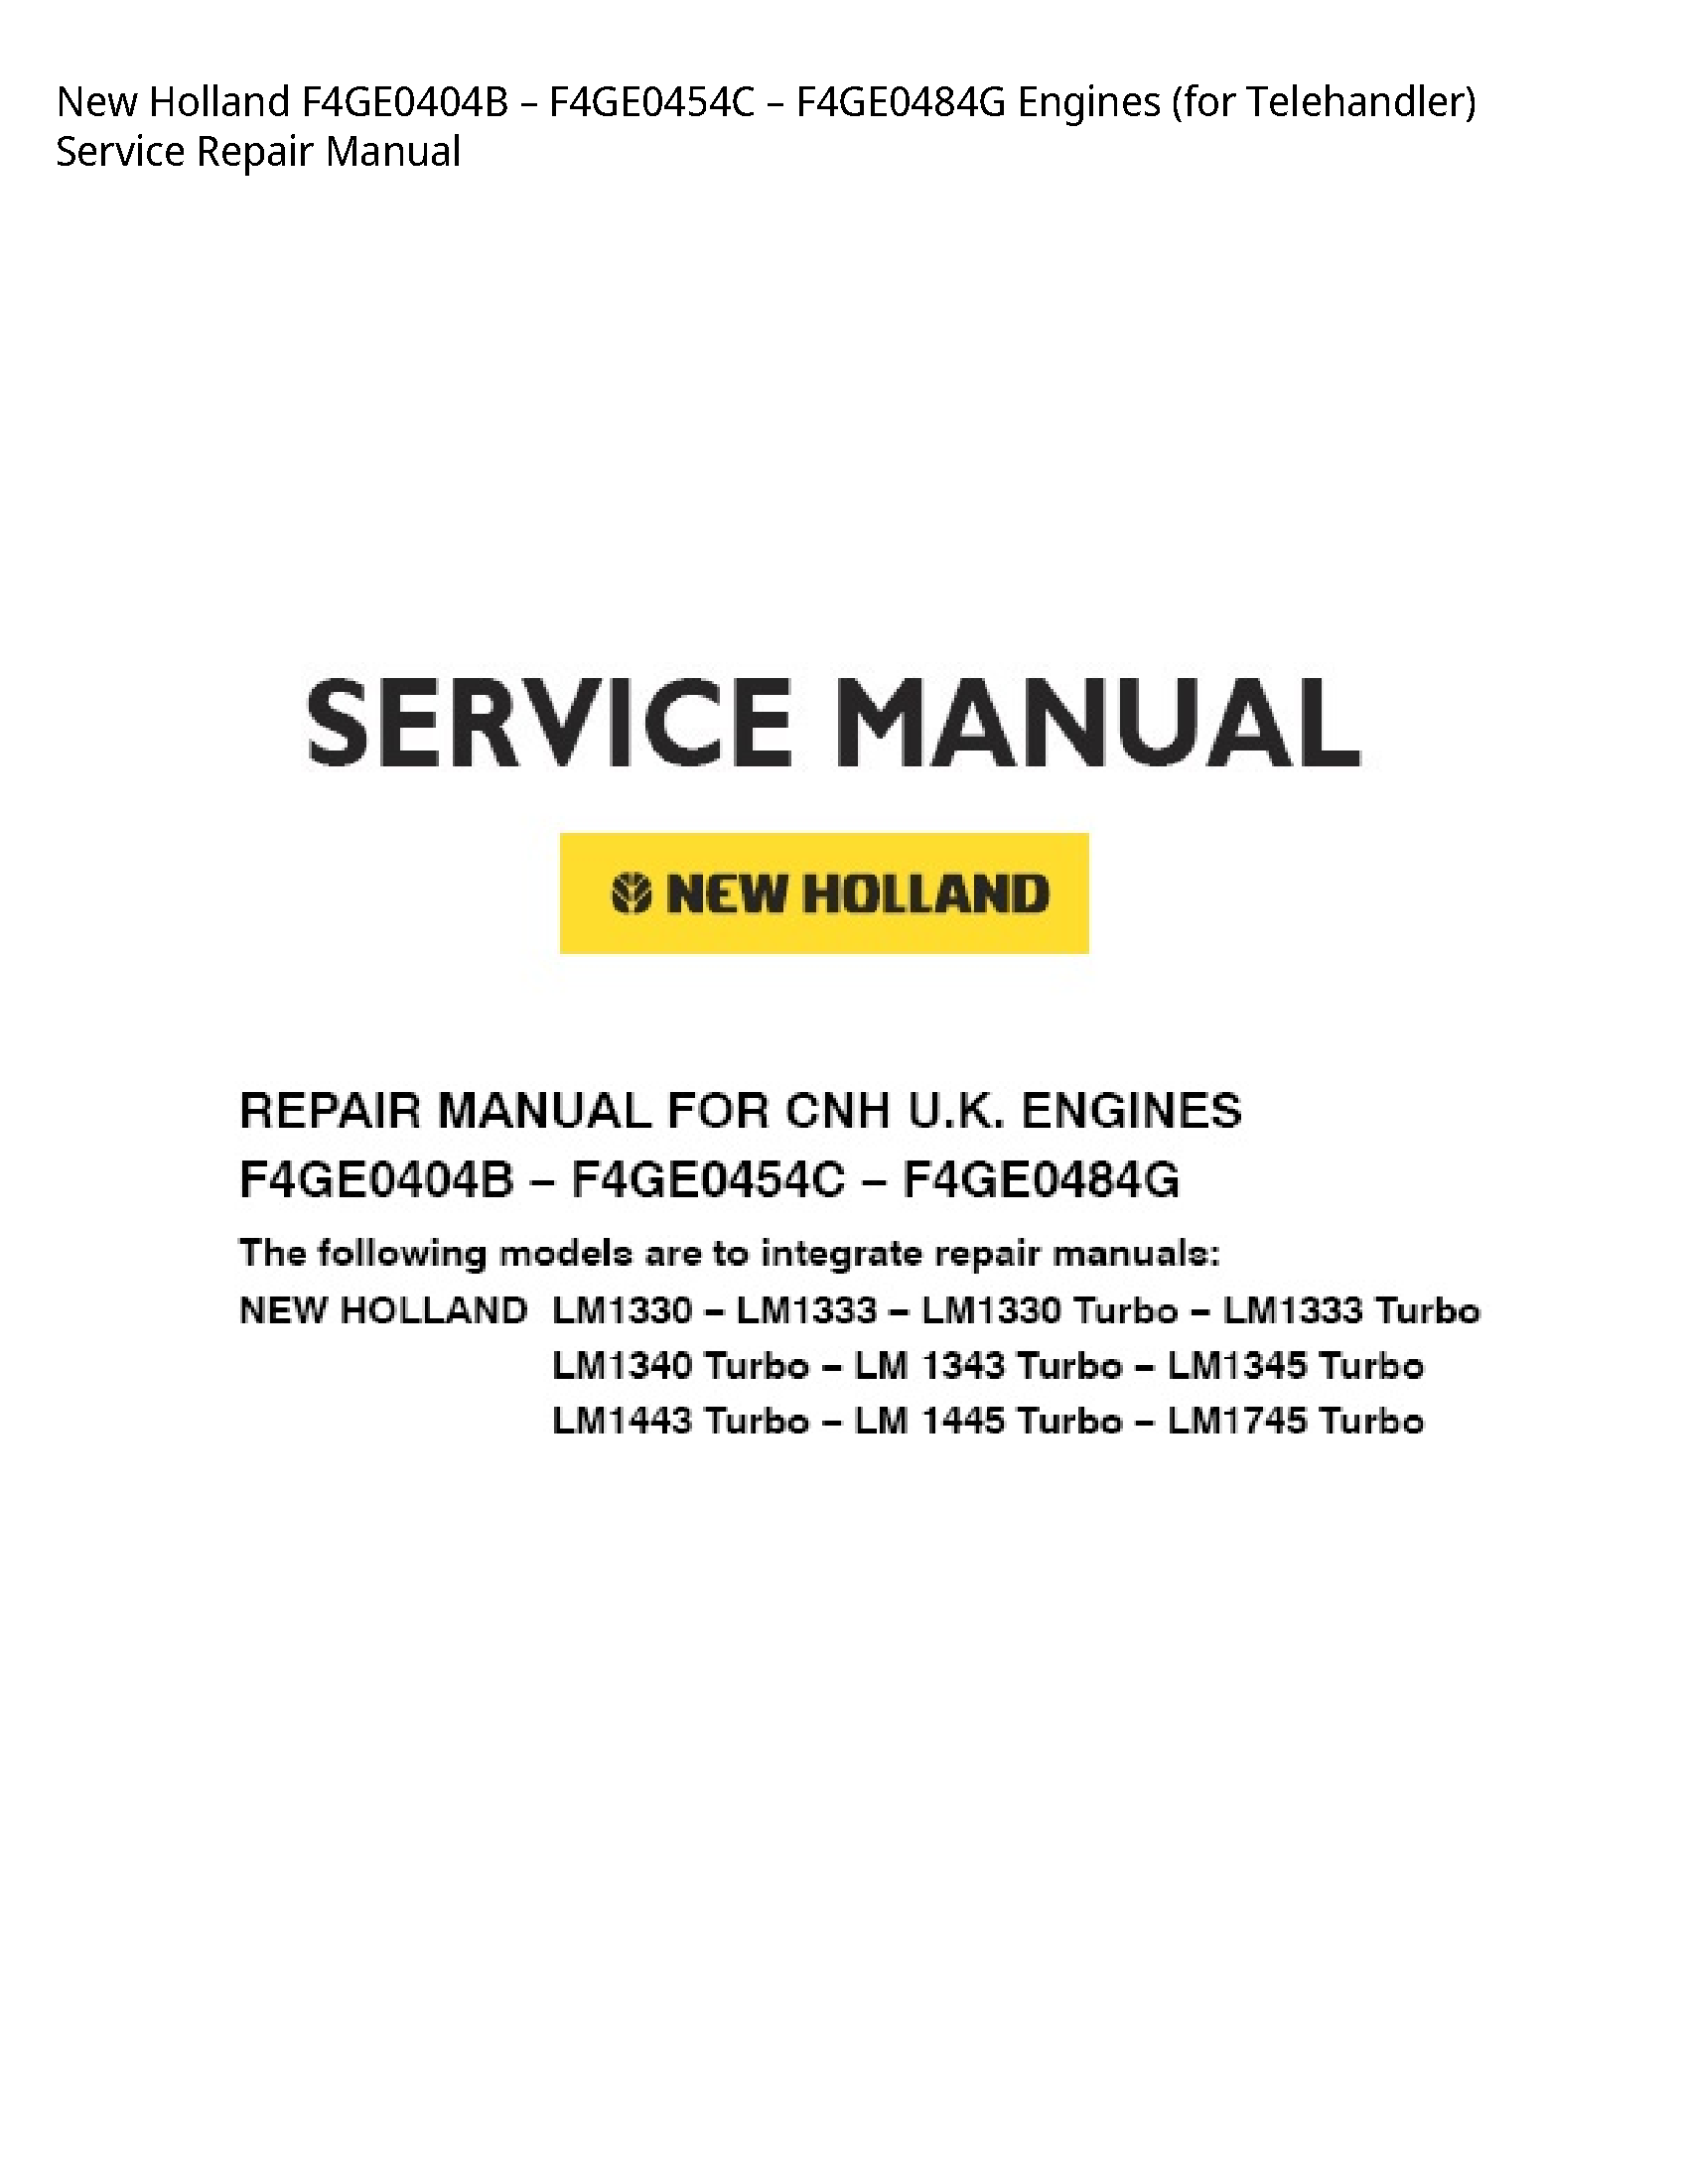 New Holland F4GE0404B Engines (for Telehandler) manual